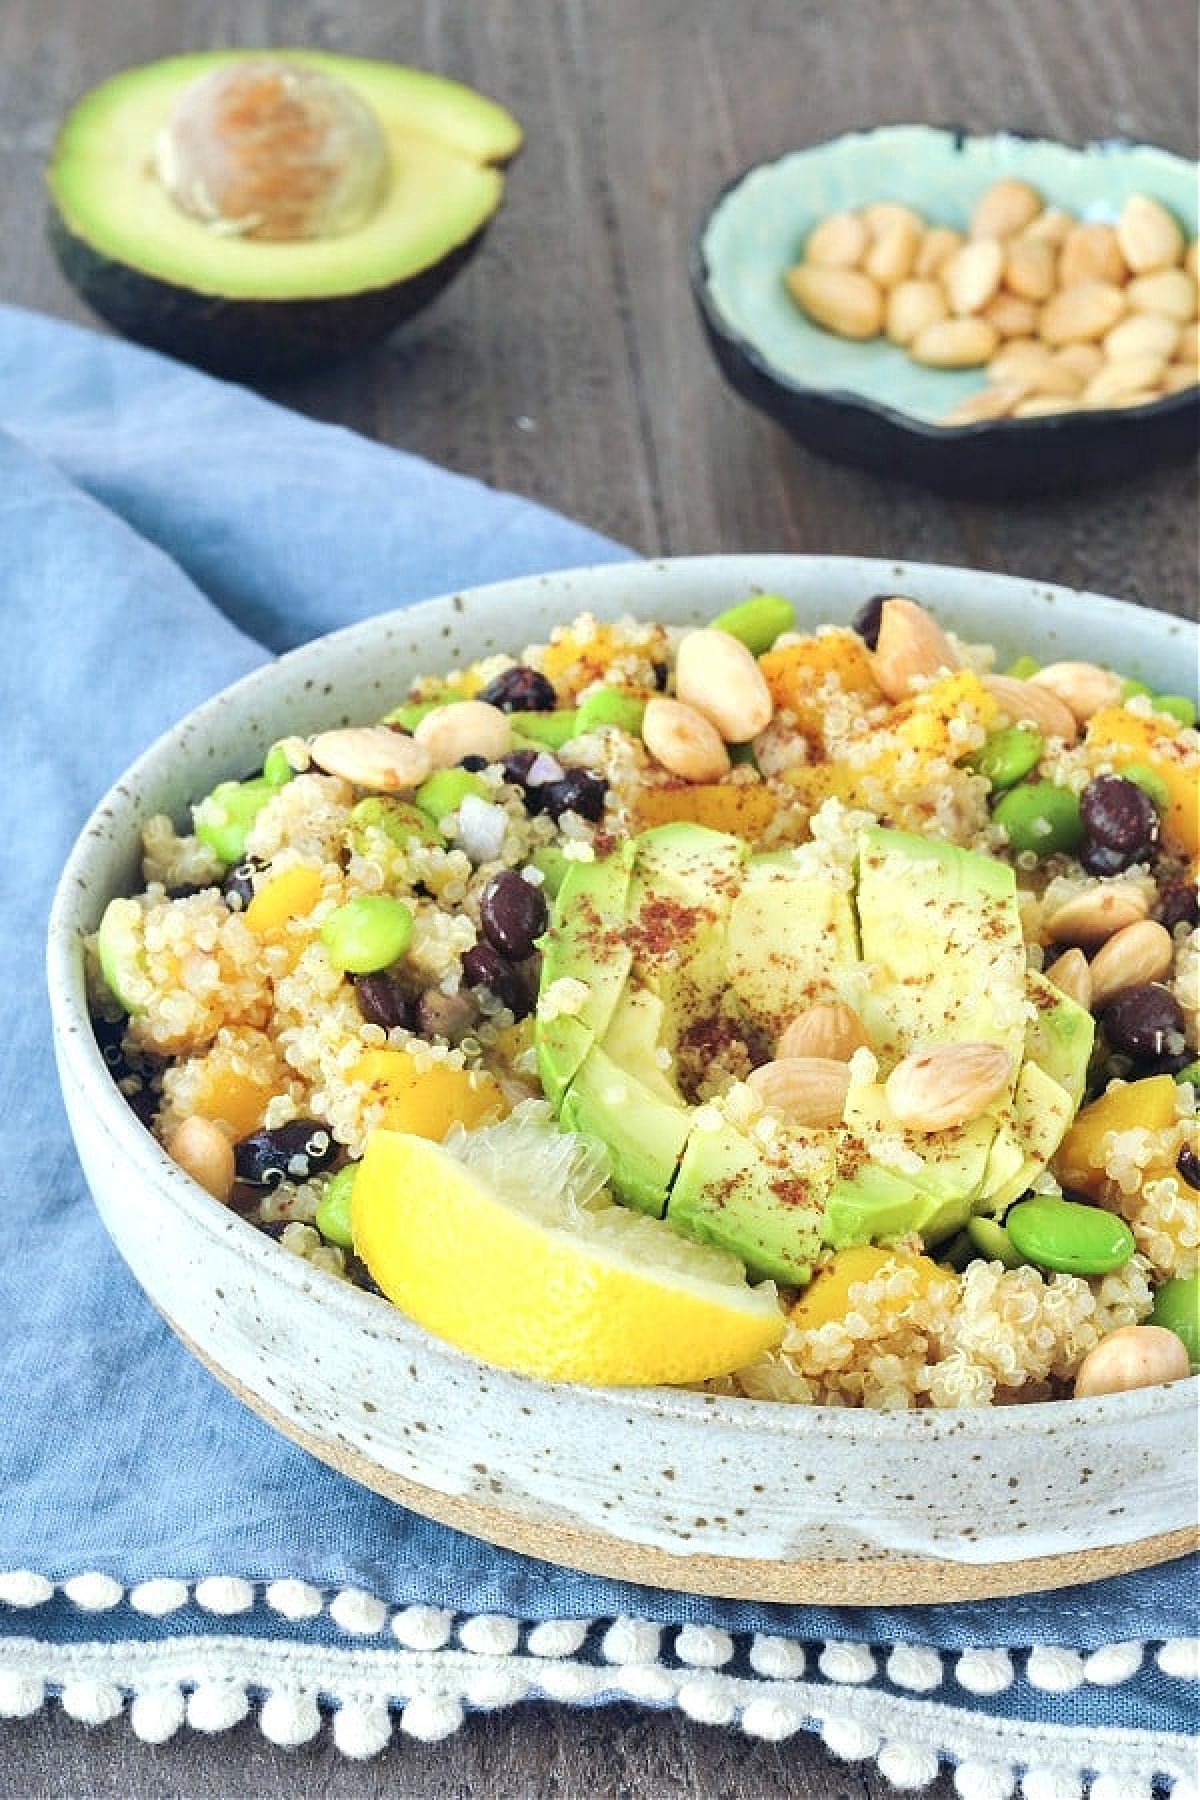 Mango edamame quinoa salad in a serving bowl with half a cubed avocado and a squeezed slice of lemon on top. The other half of avocado and a small bowl of almonds in background.